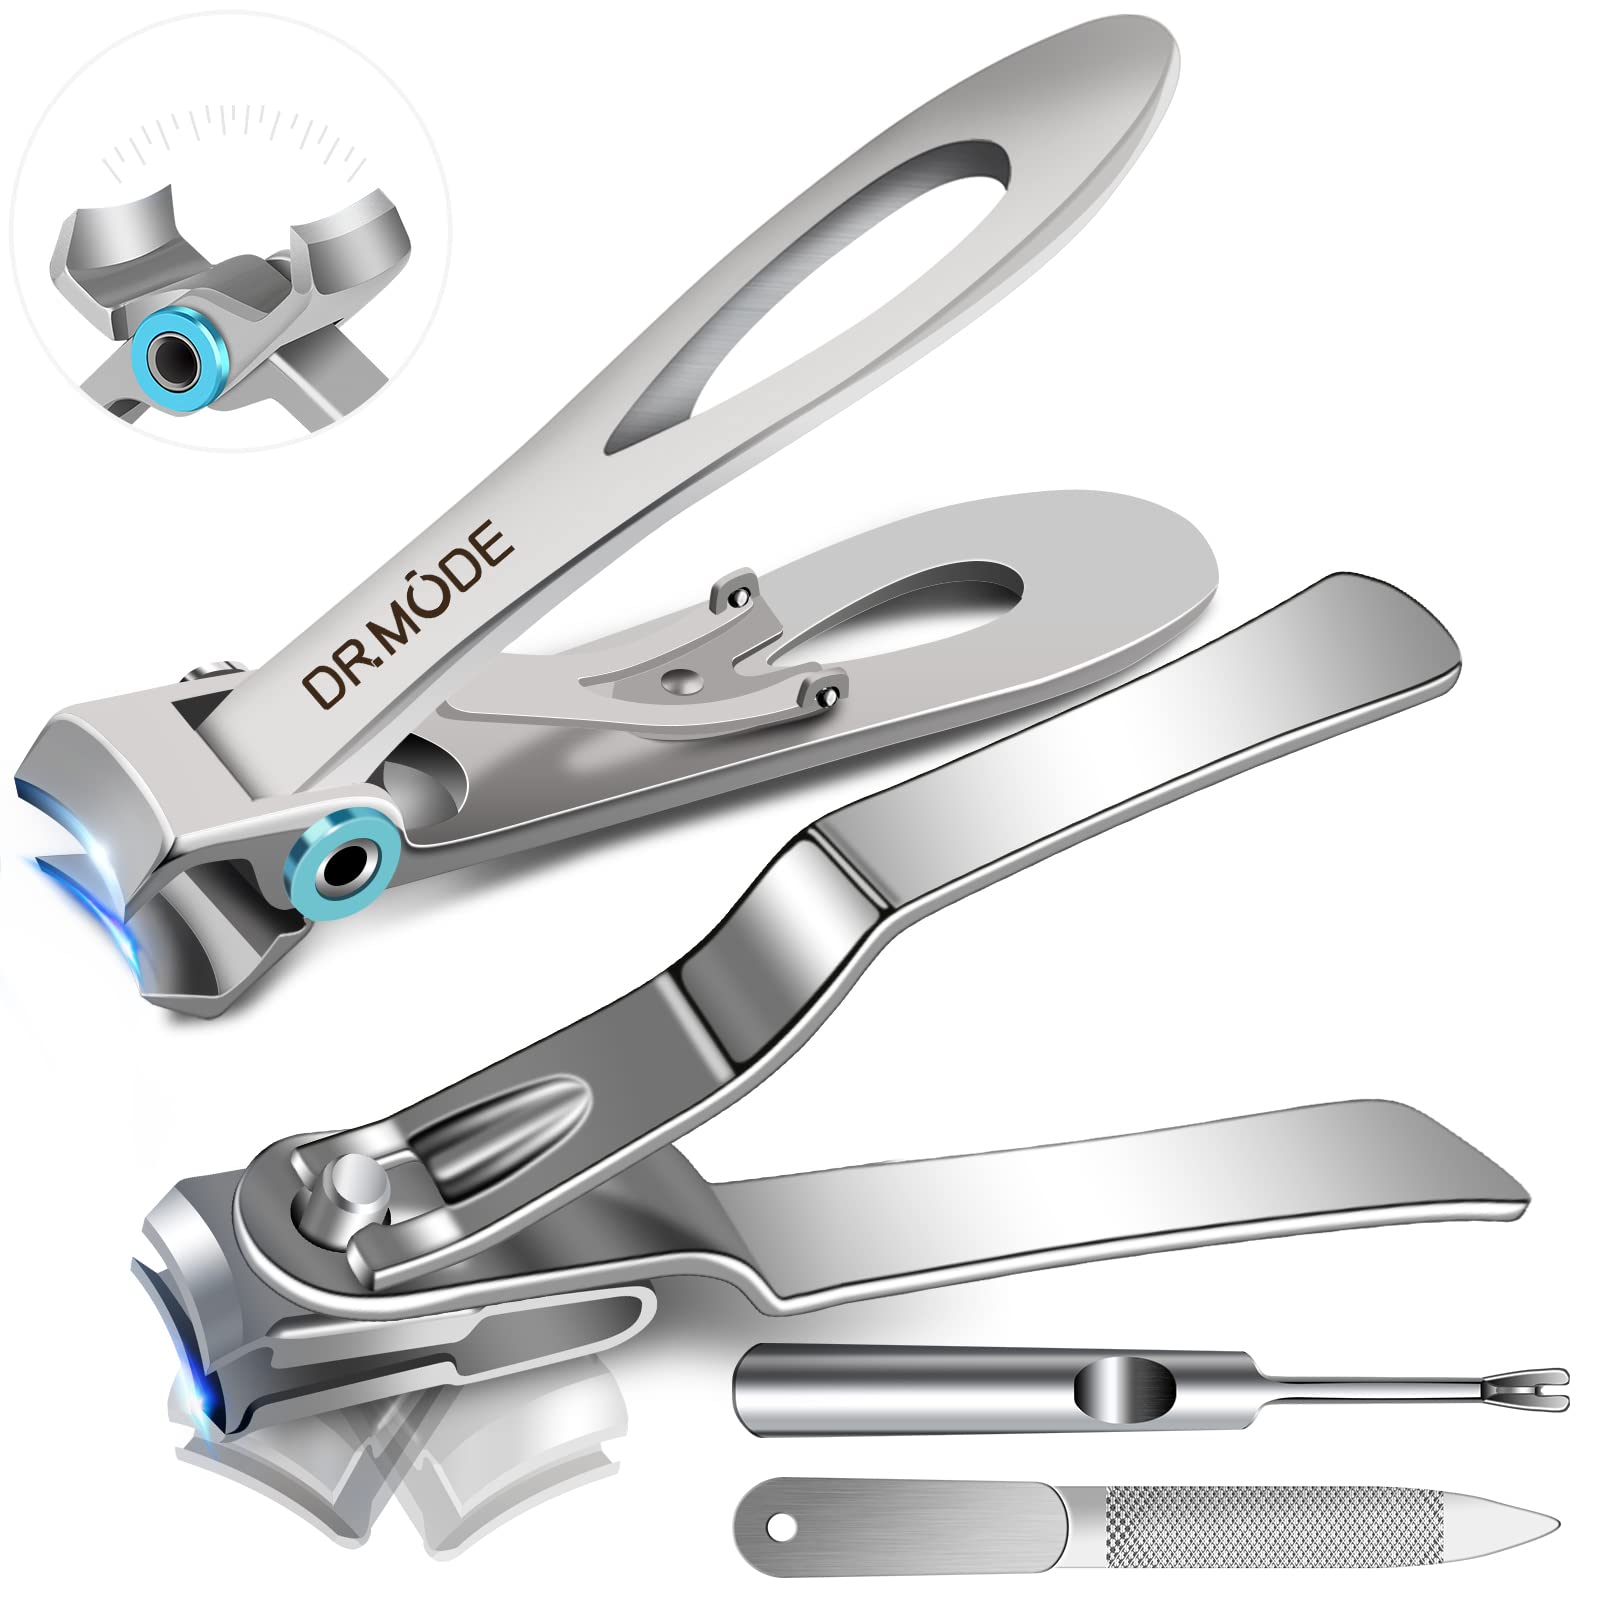 Szqht 15mm Wide Jaw Opening Nail Clippers for Thick Nails,Finger Nail